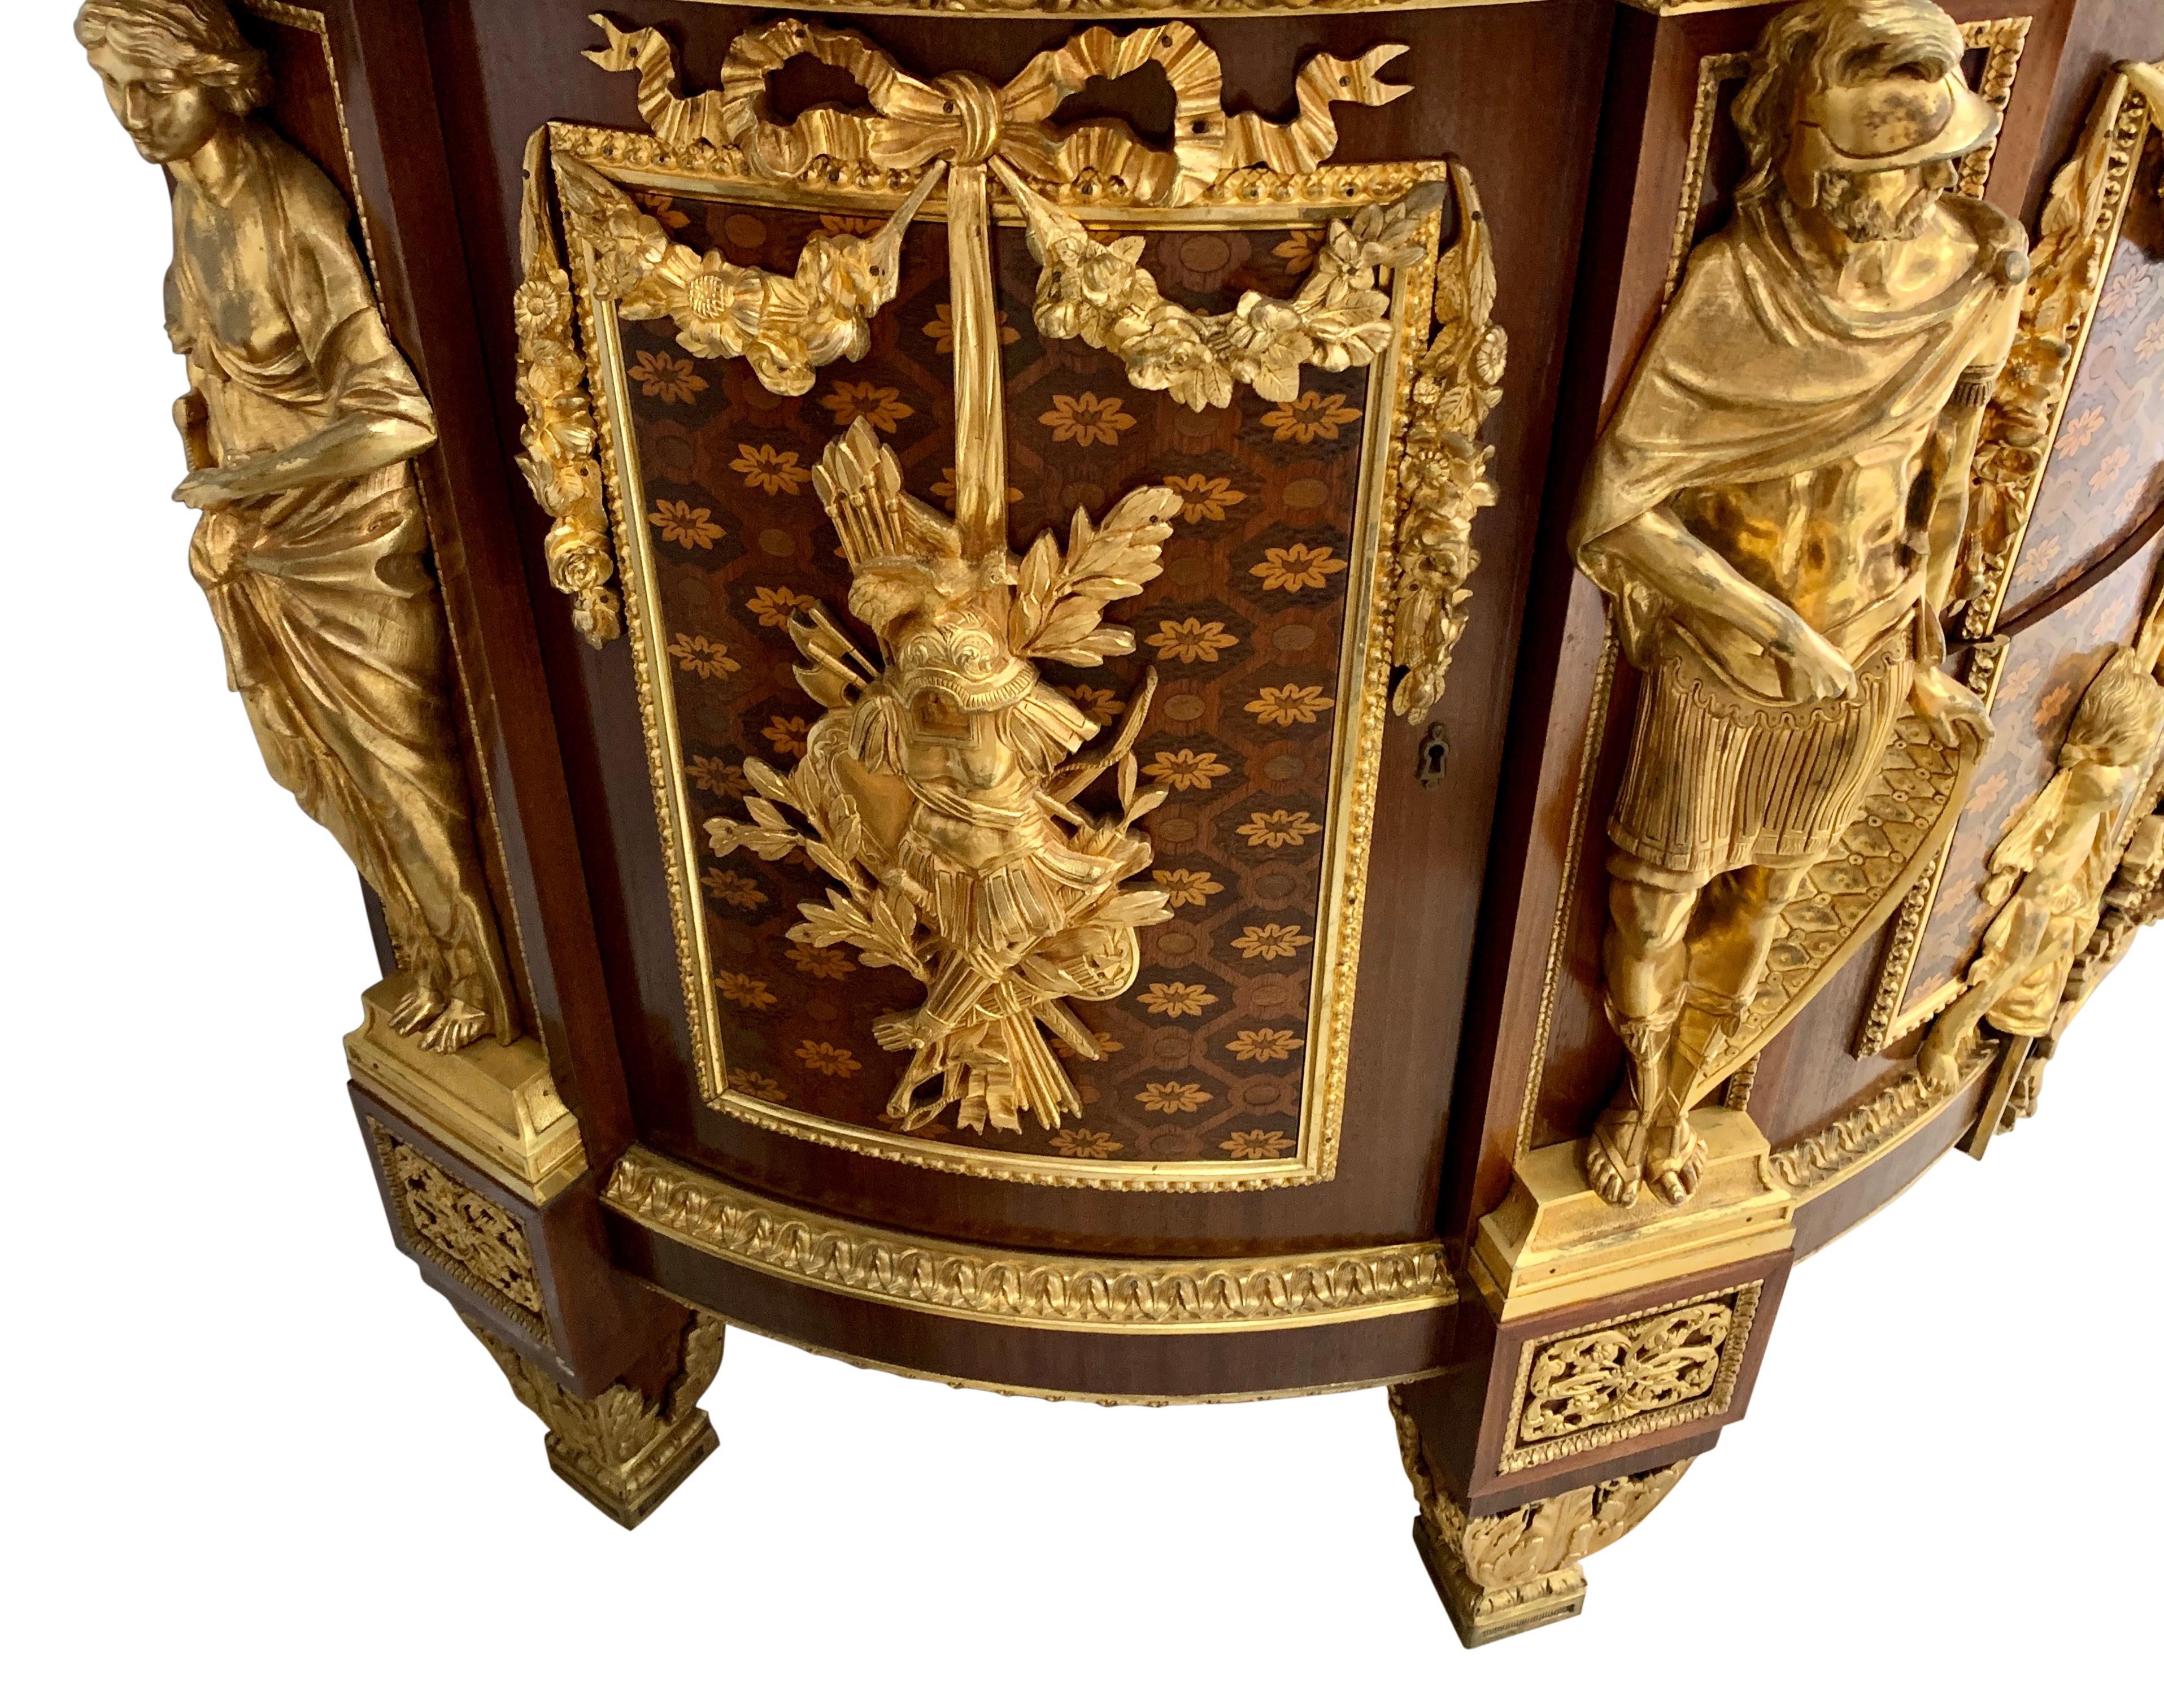 Ormolu 19th Century French Gilt-Bronze Mounted Commode after Jean-Henri Riesener For Sale